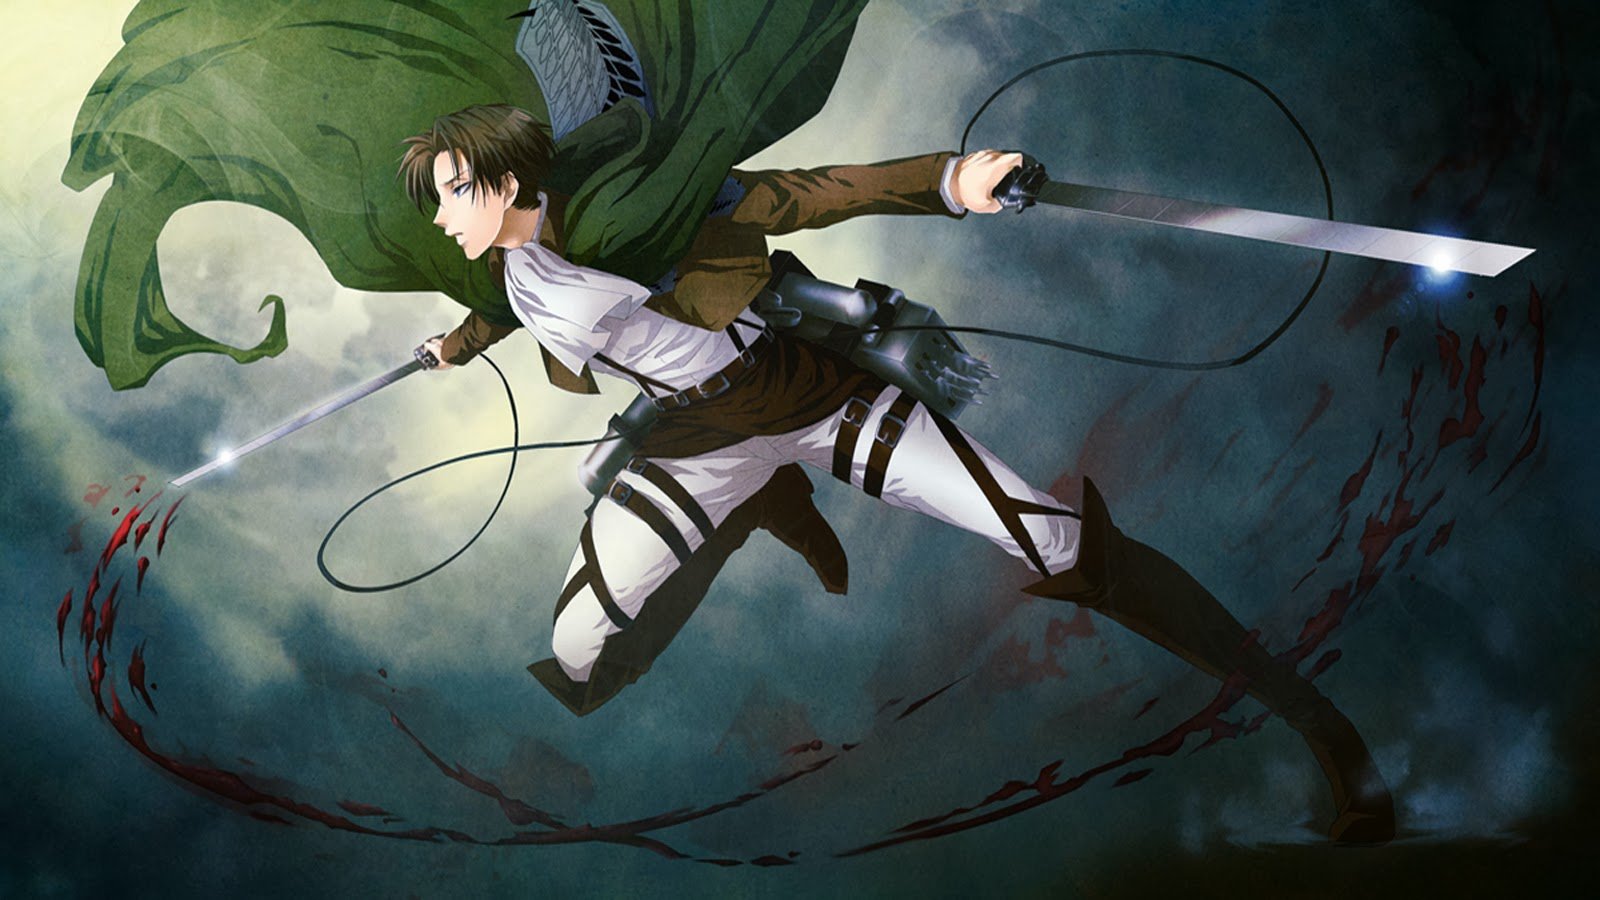 Levi Cleaning Wallpapers